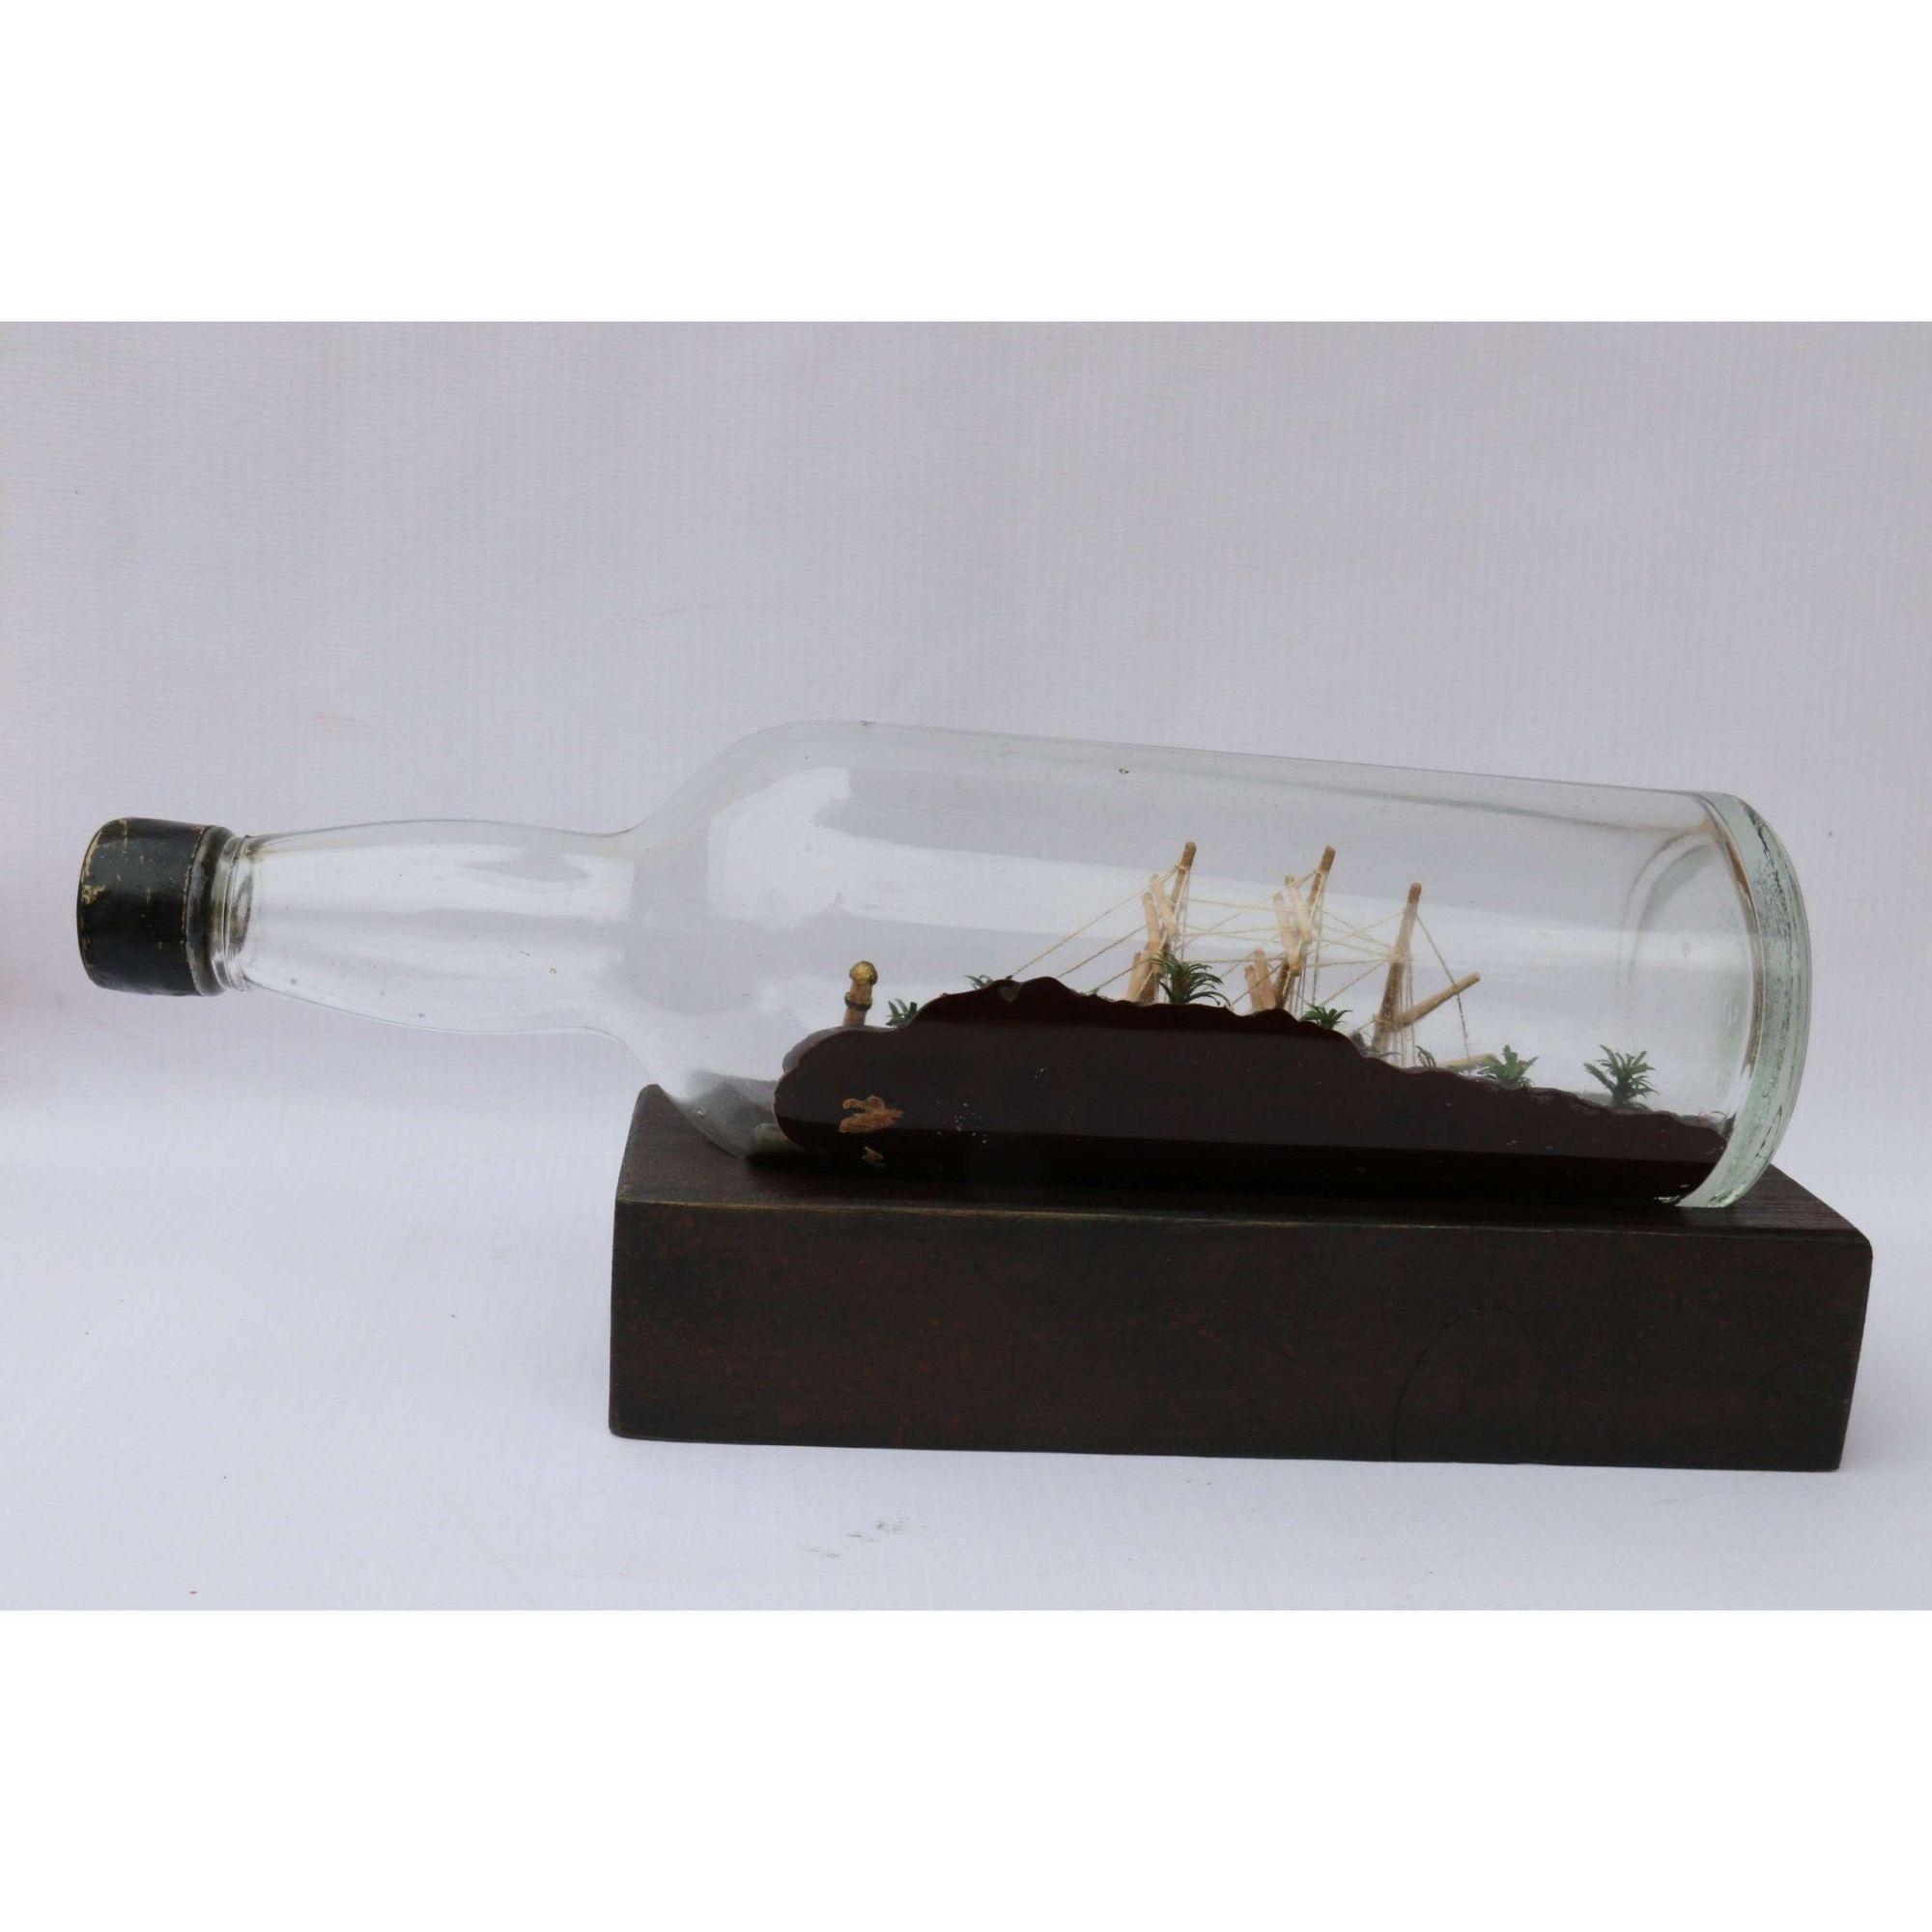 Early 20th Century Model Ship Diorama Within a Bottle, circa 1920 In Good Condition For Sale In Central England, GB